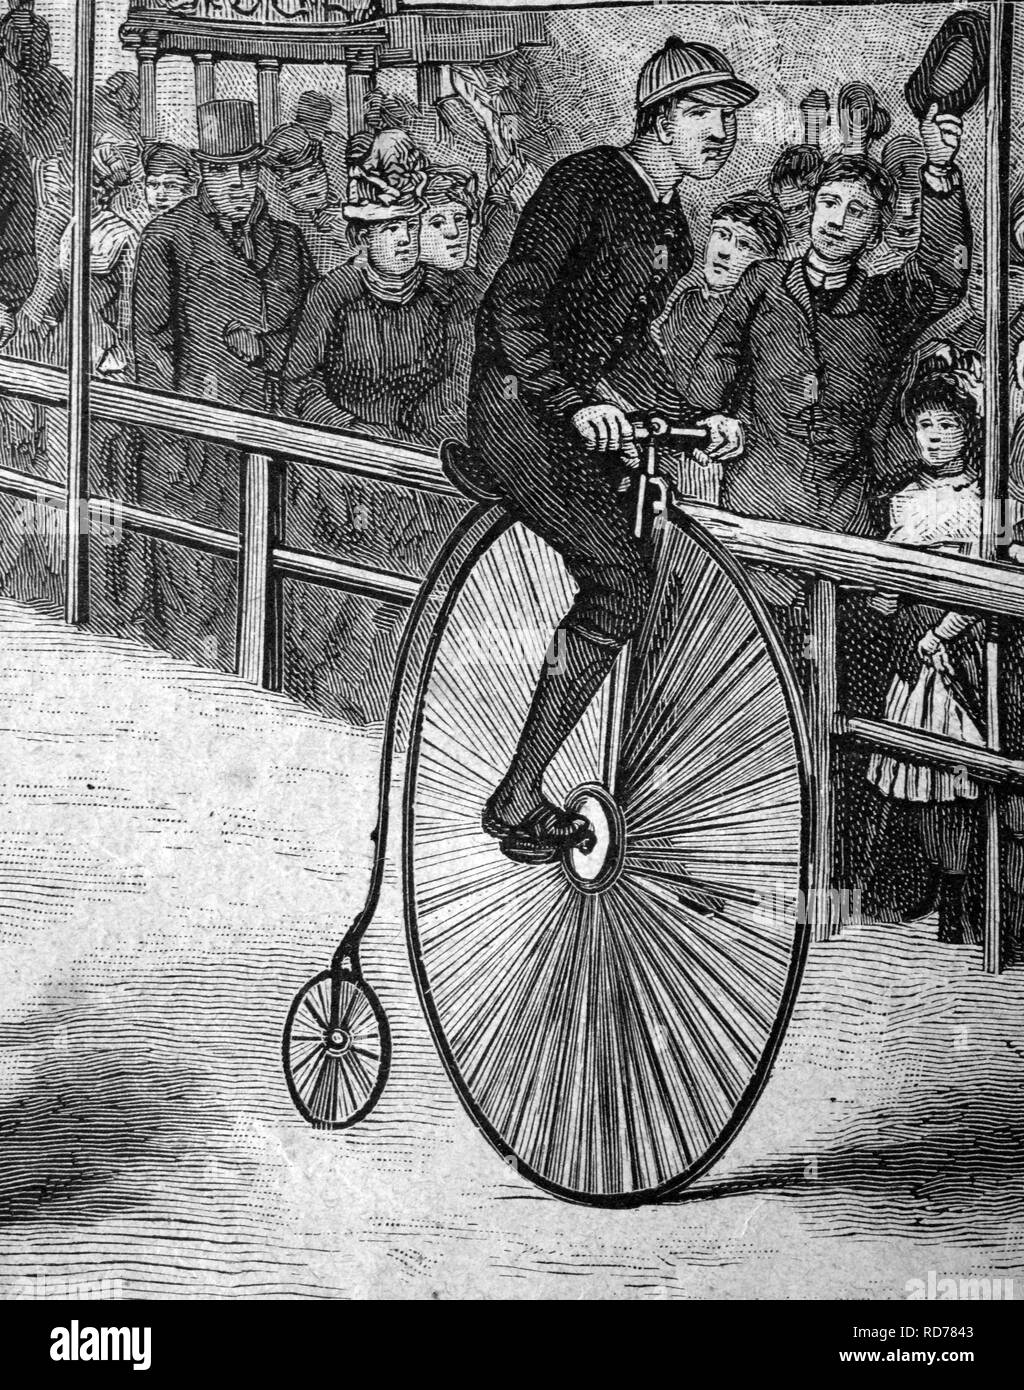 Man riding a Penny Farthing bicycle, historical illustration, circa 1886 Stock Photo